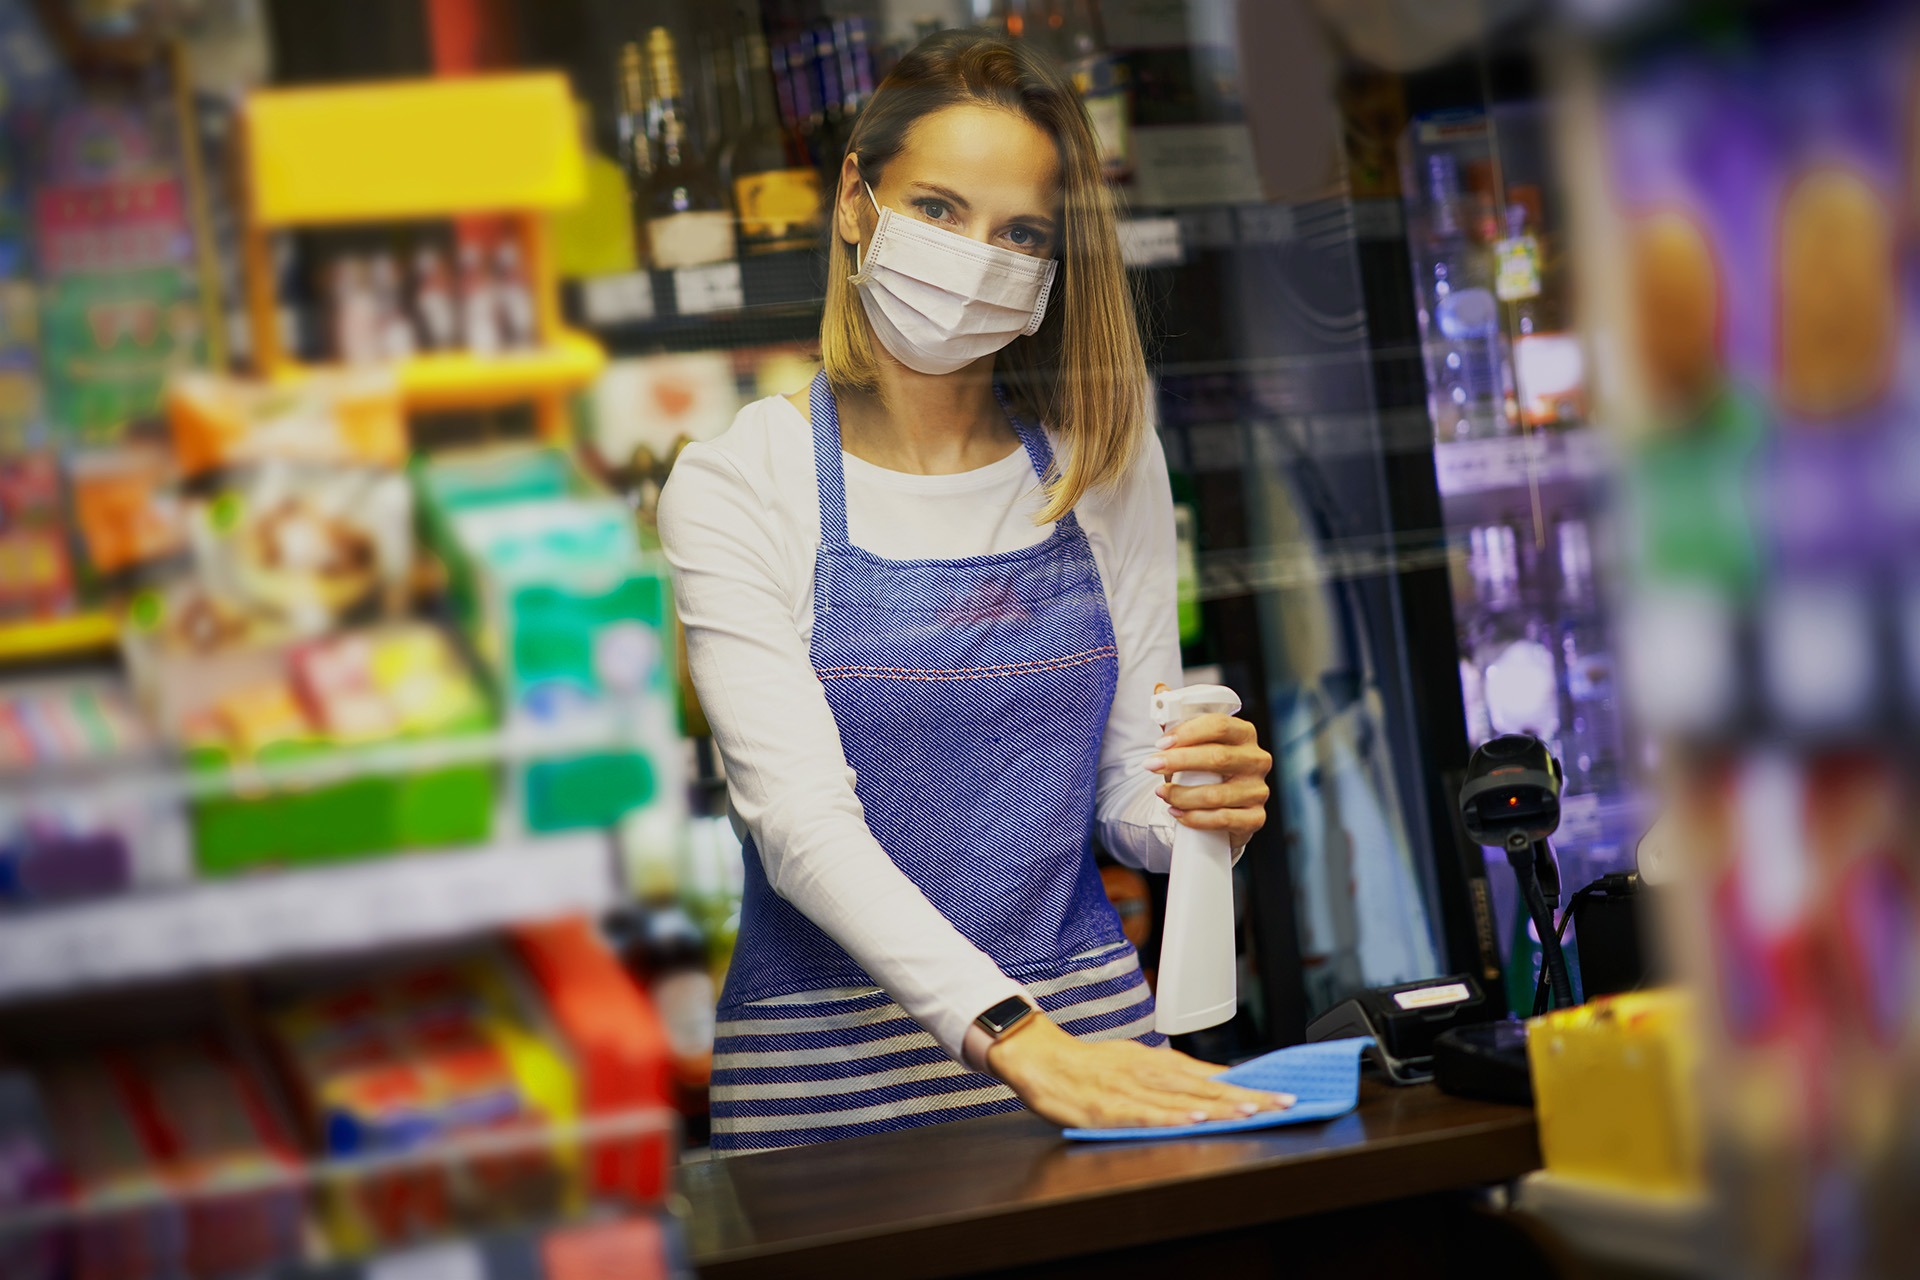 Shop assistant disinfecting surfaces in grocery store